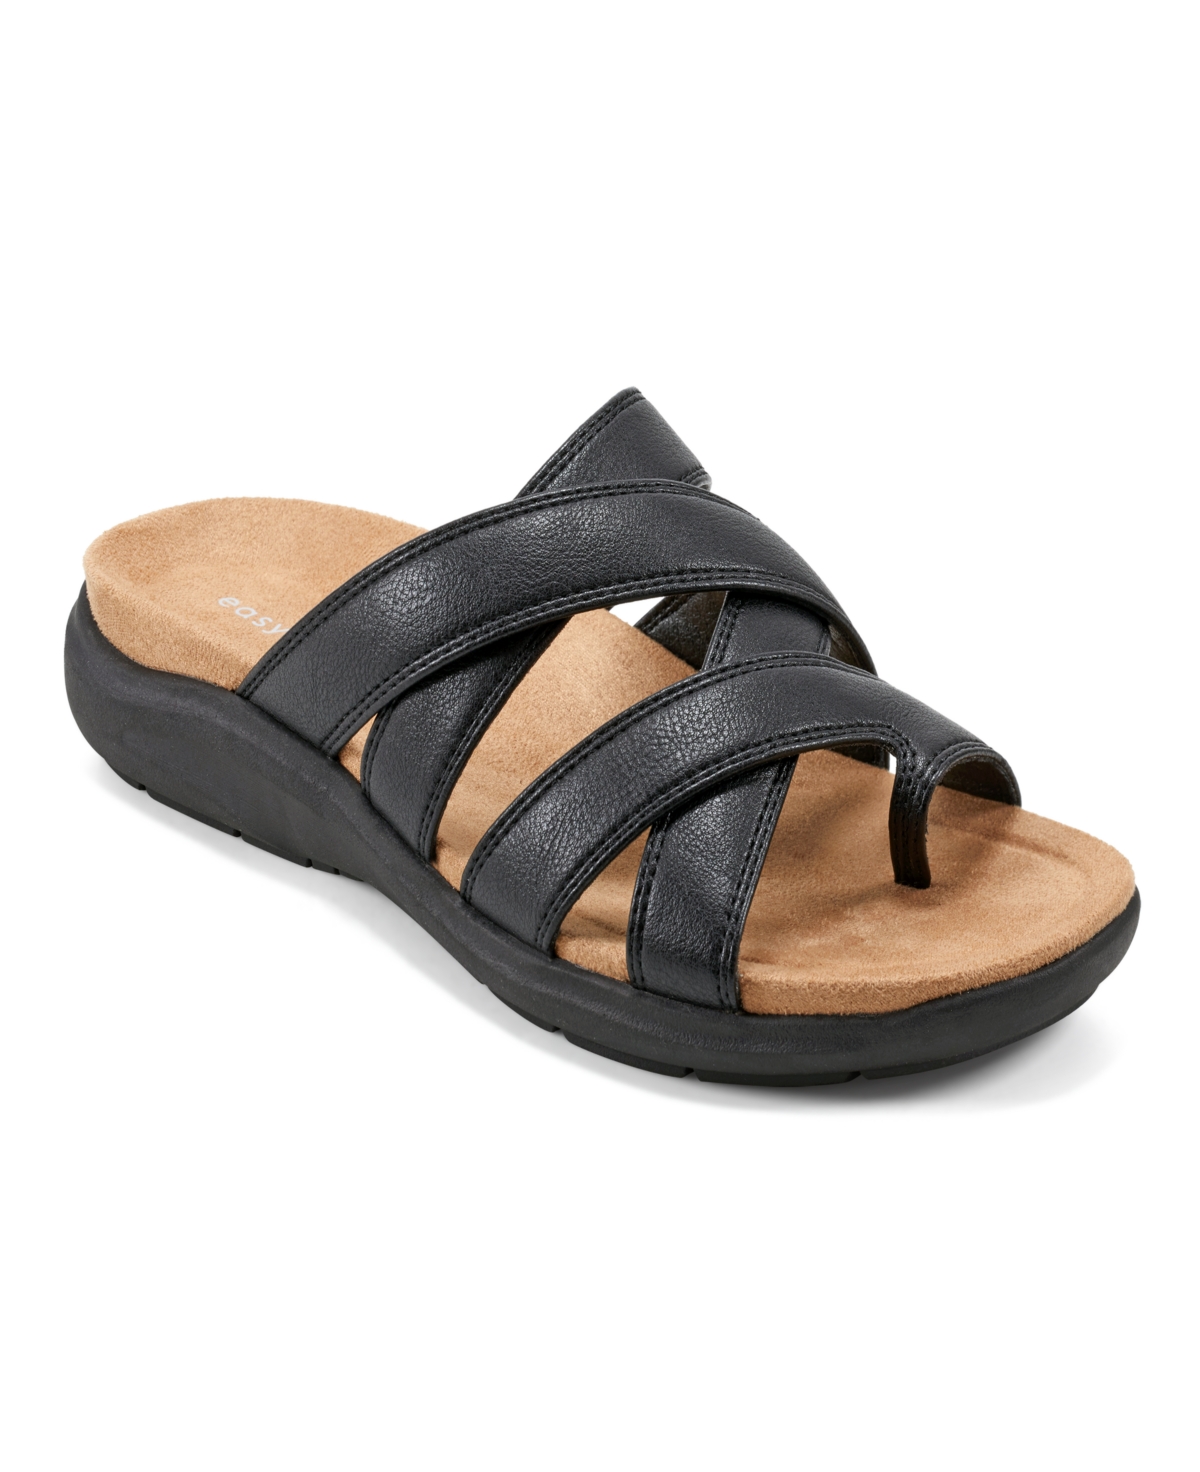 Women's Westly Strappy Casual Flat Sandals - Cognac